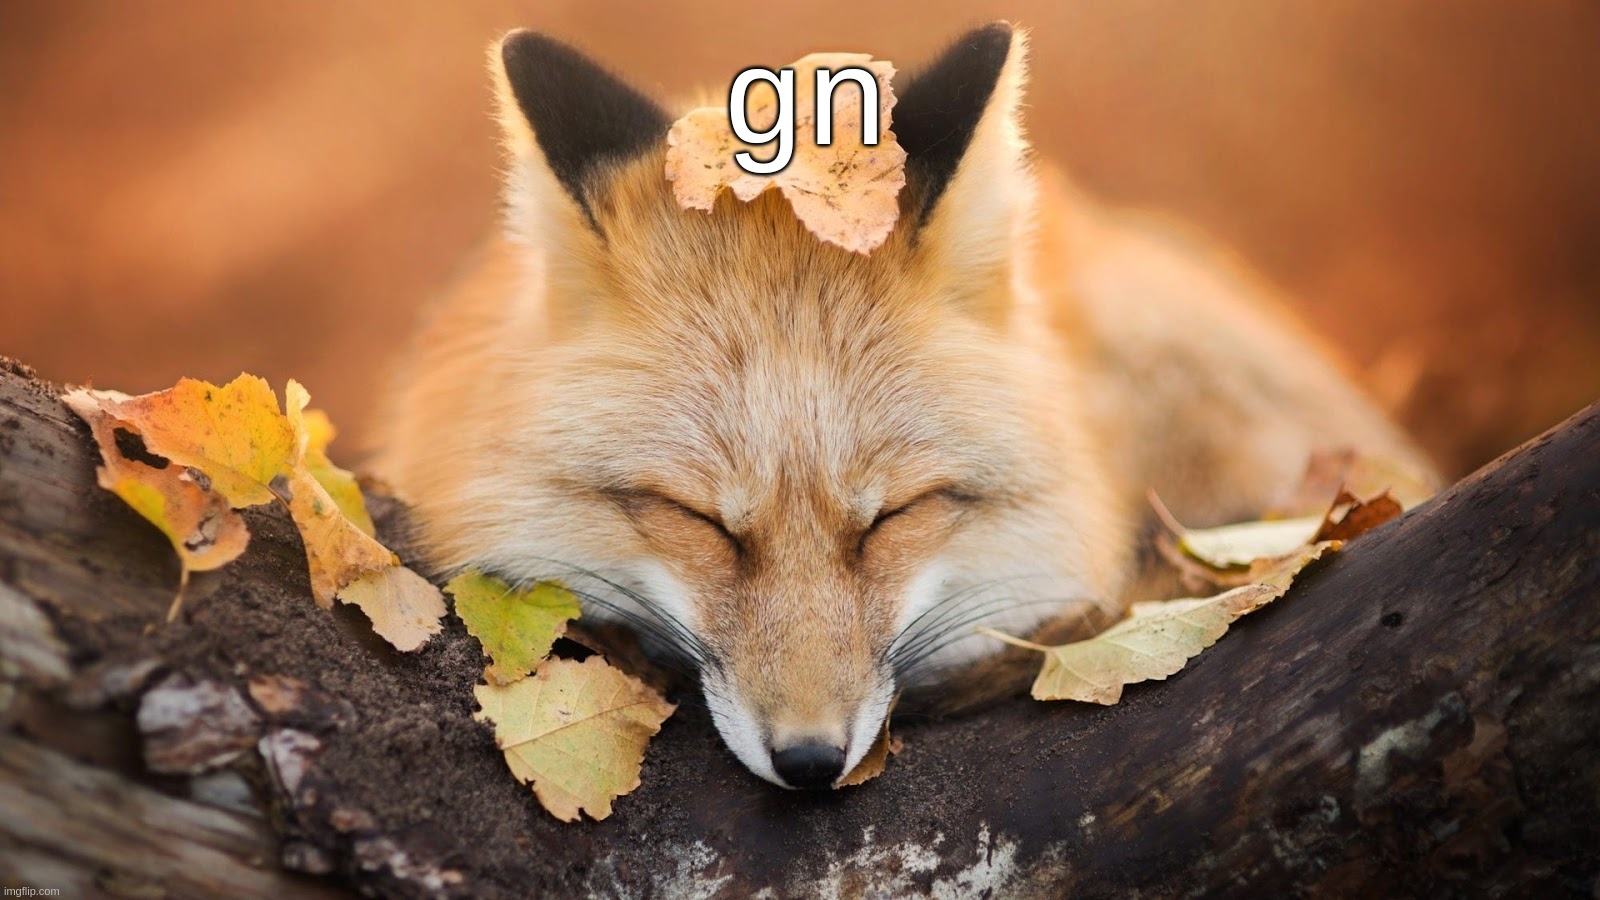 am slep | gn | image tagged in goodnight | made w/ Imgflip meme maker